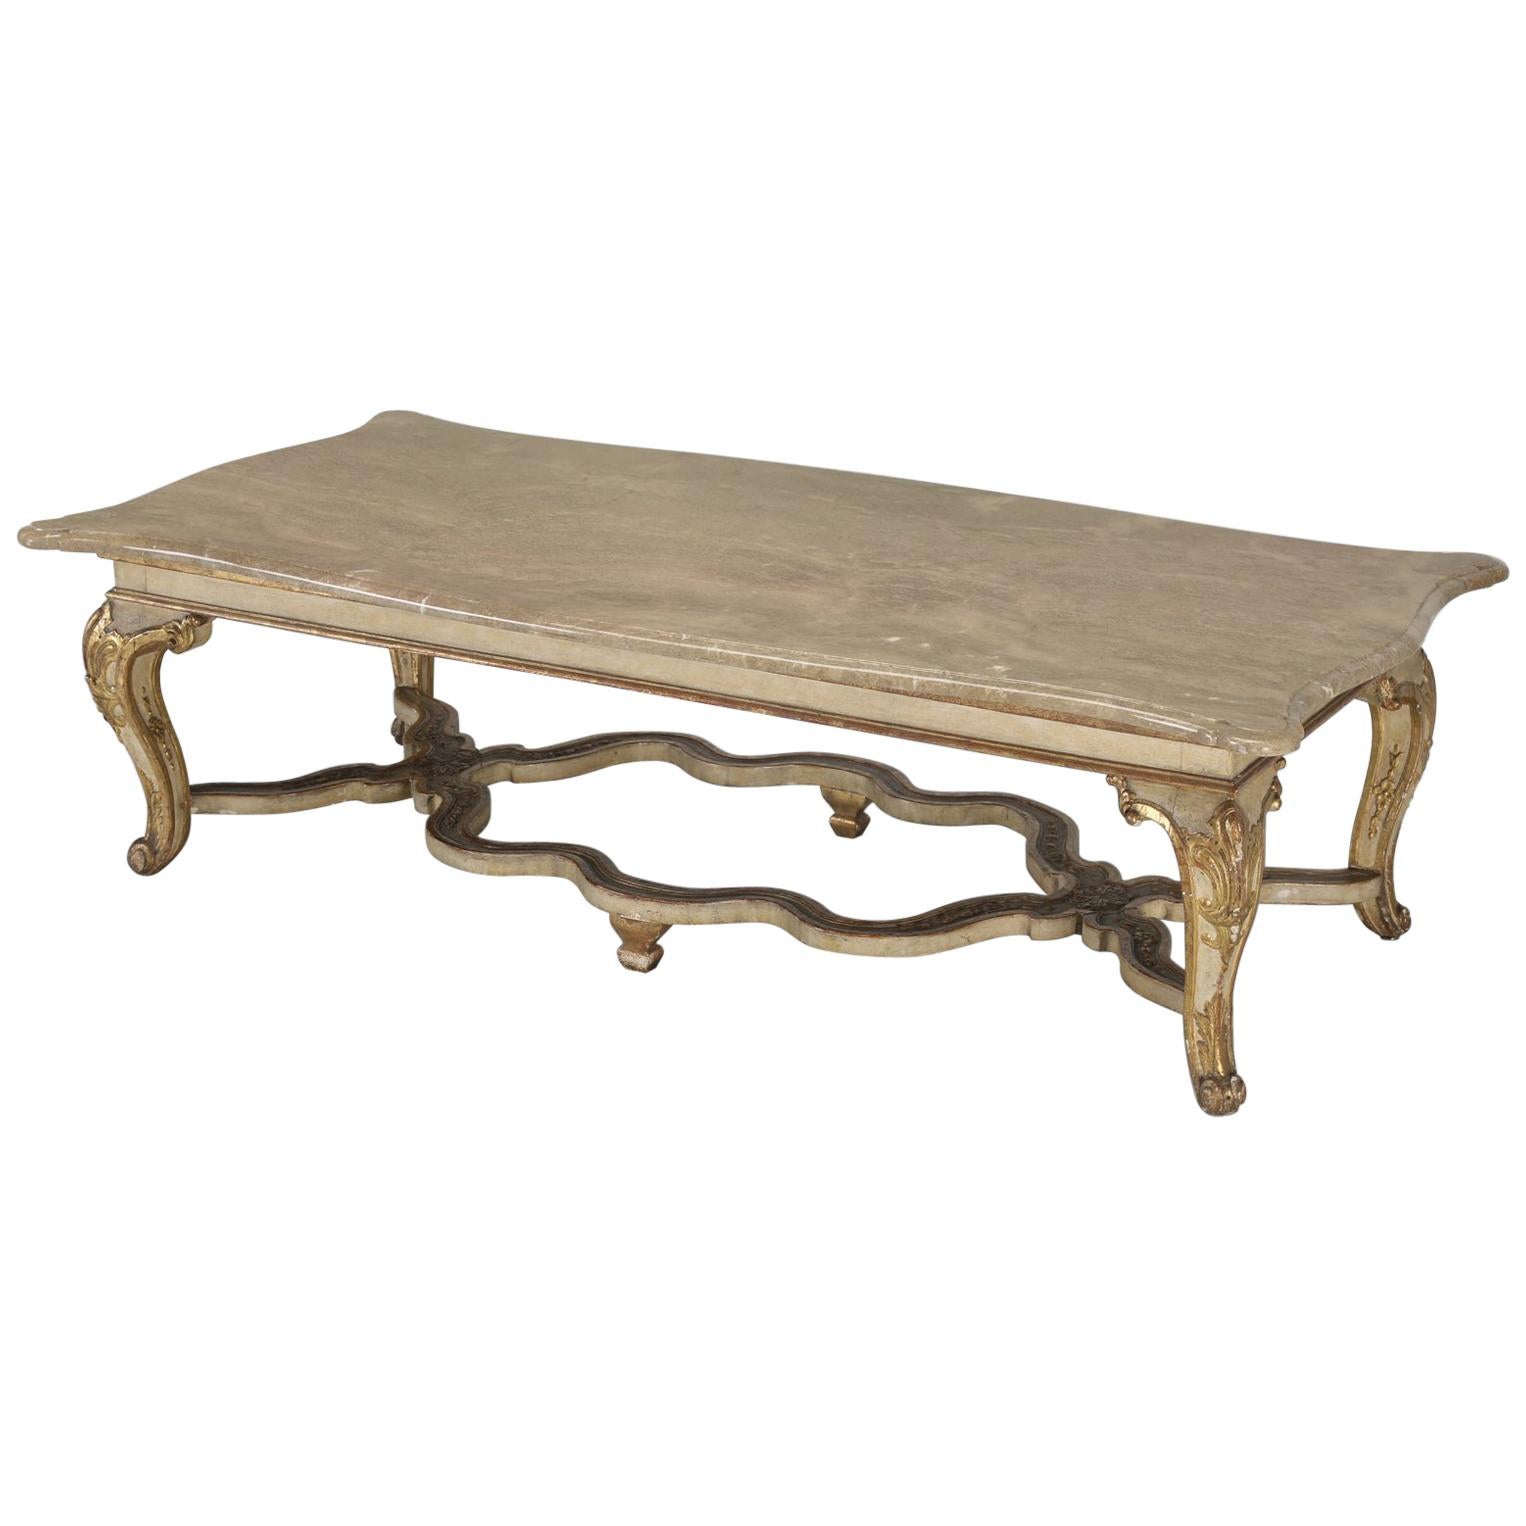 Vintage Italian Coffee Table, in Old Original Paint with a Marble Top